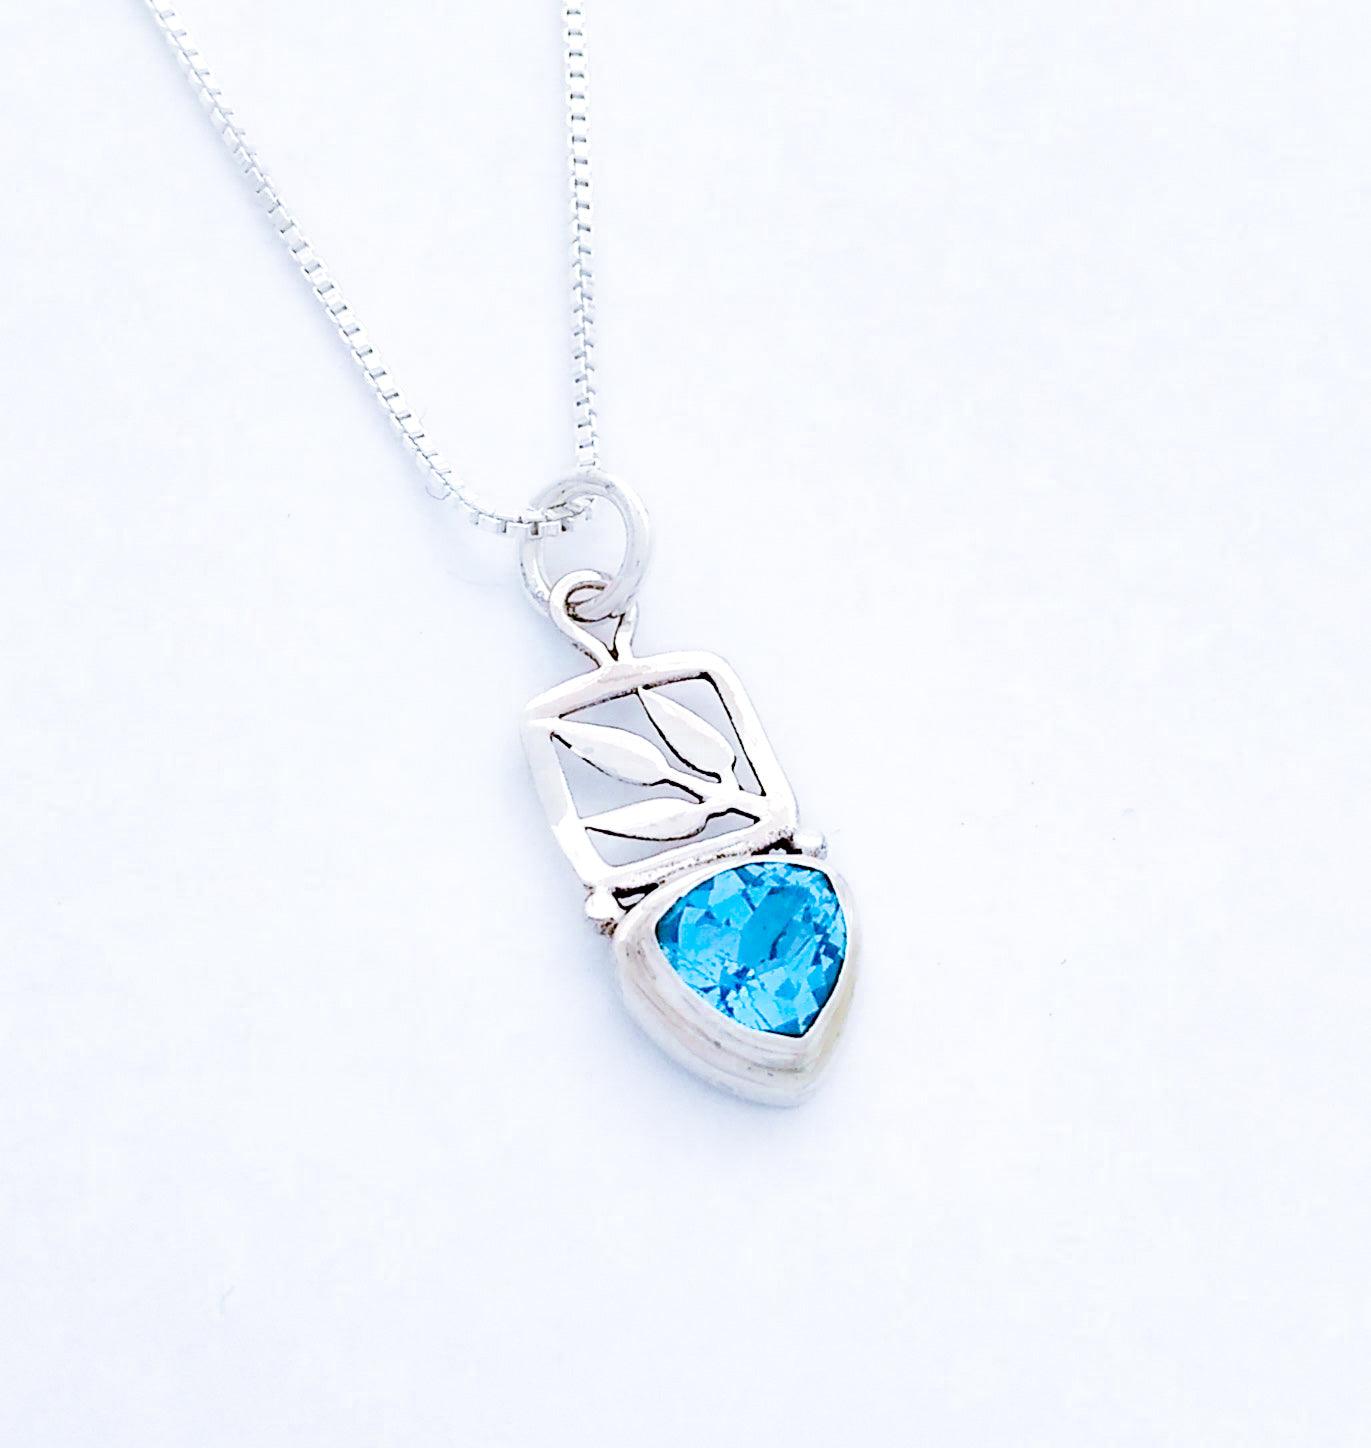 Sterling silver leaf cut out pendant with a small teardrop-shaped blue topaz stone at the bottom